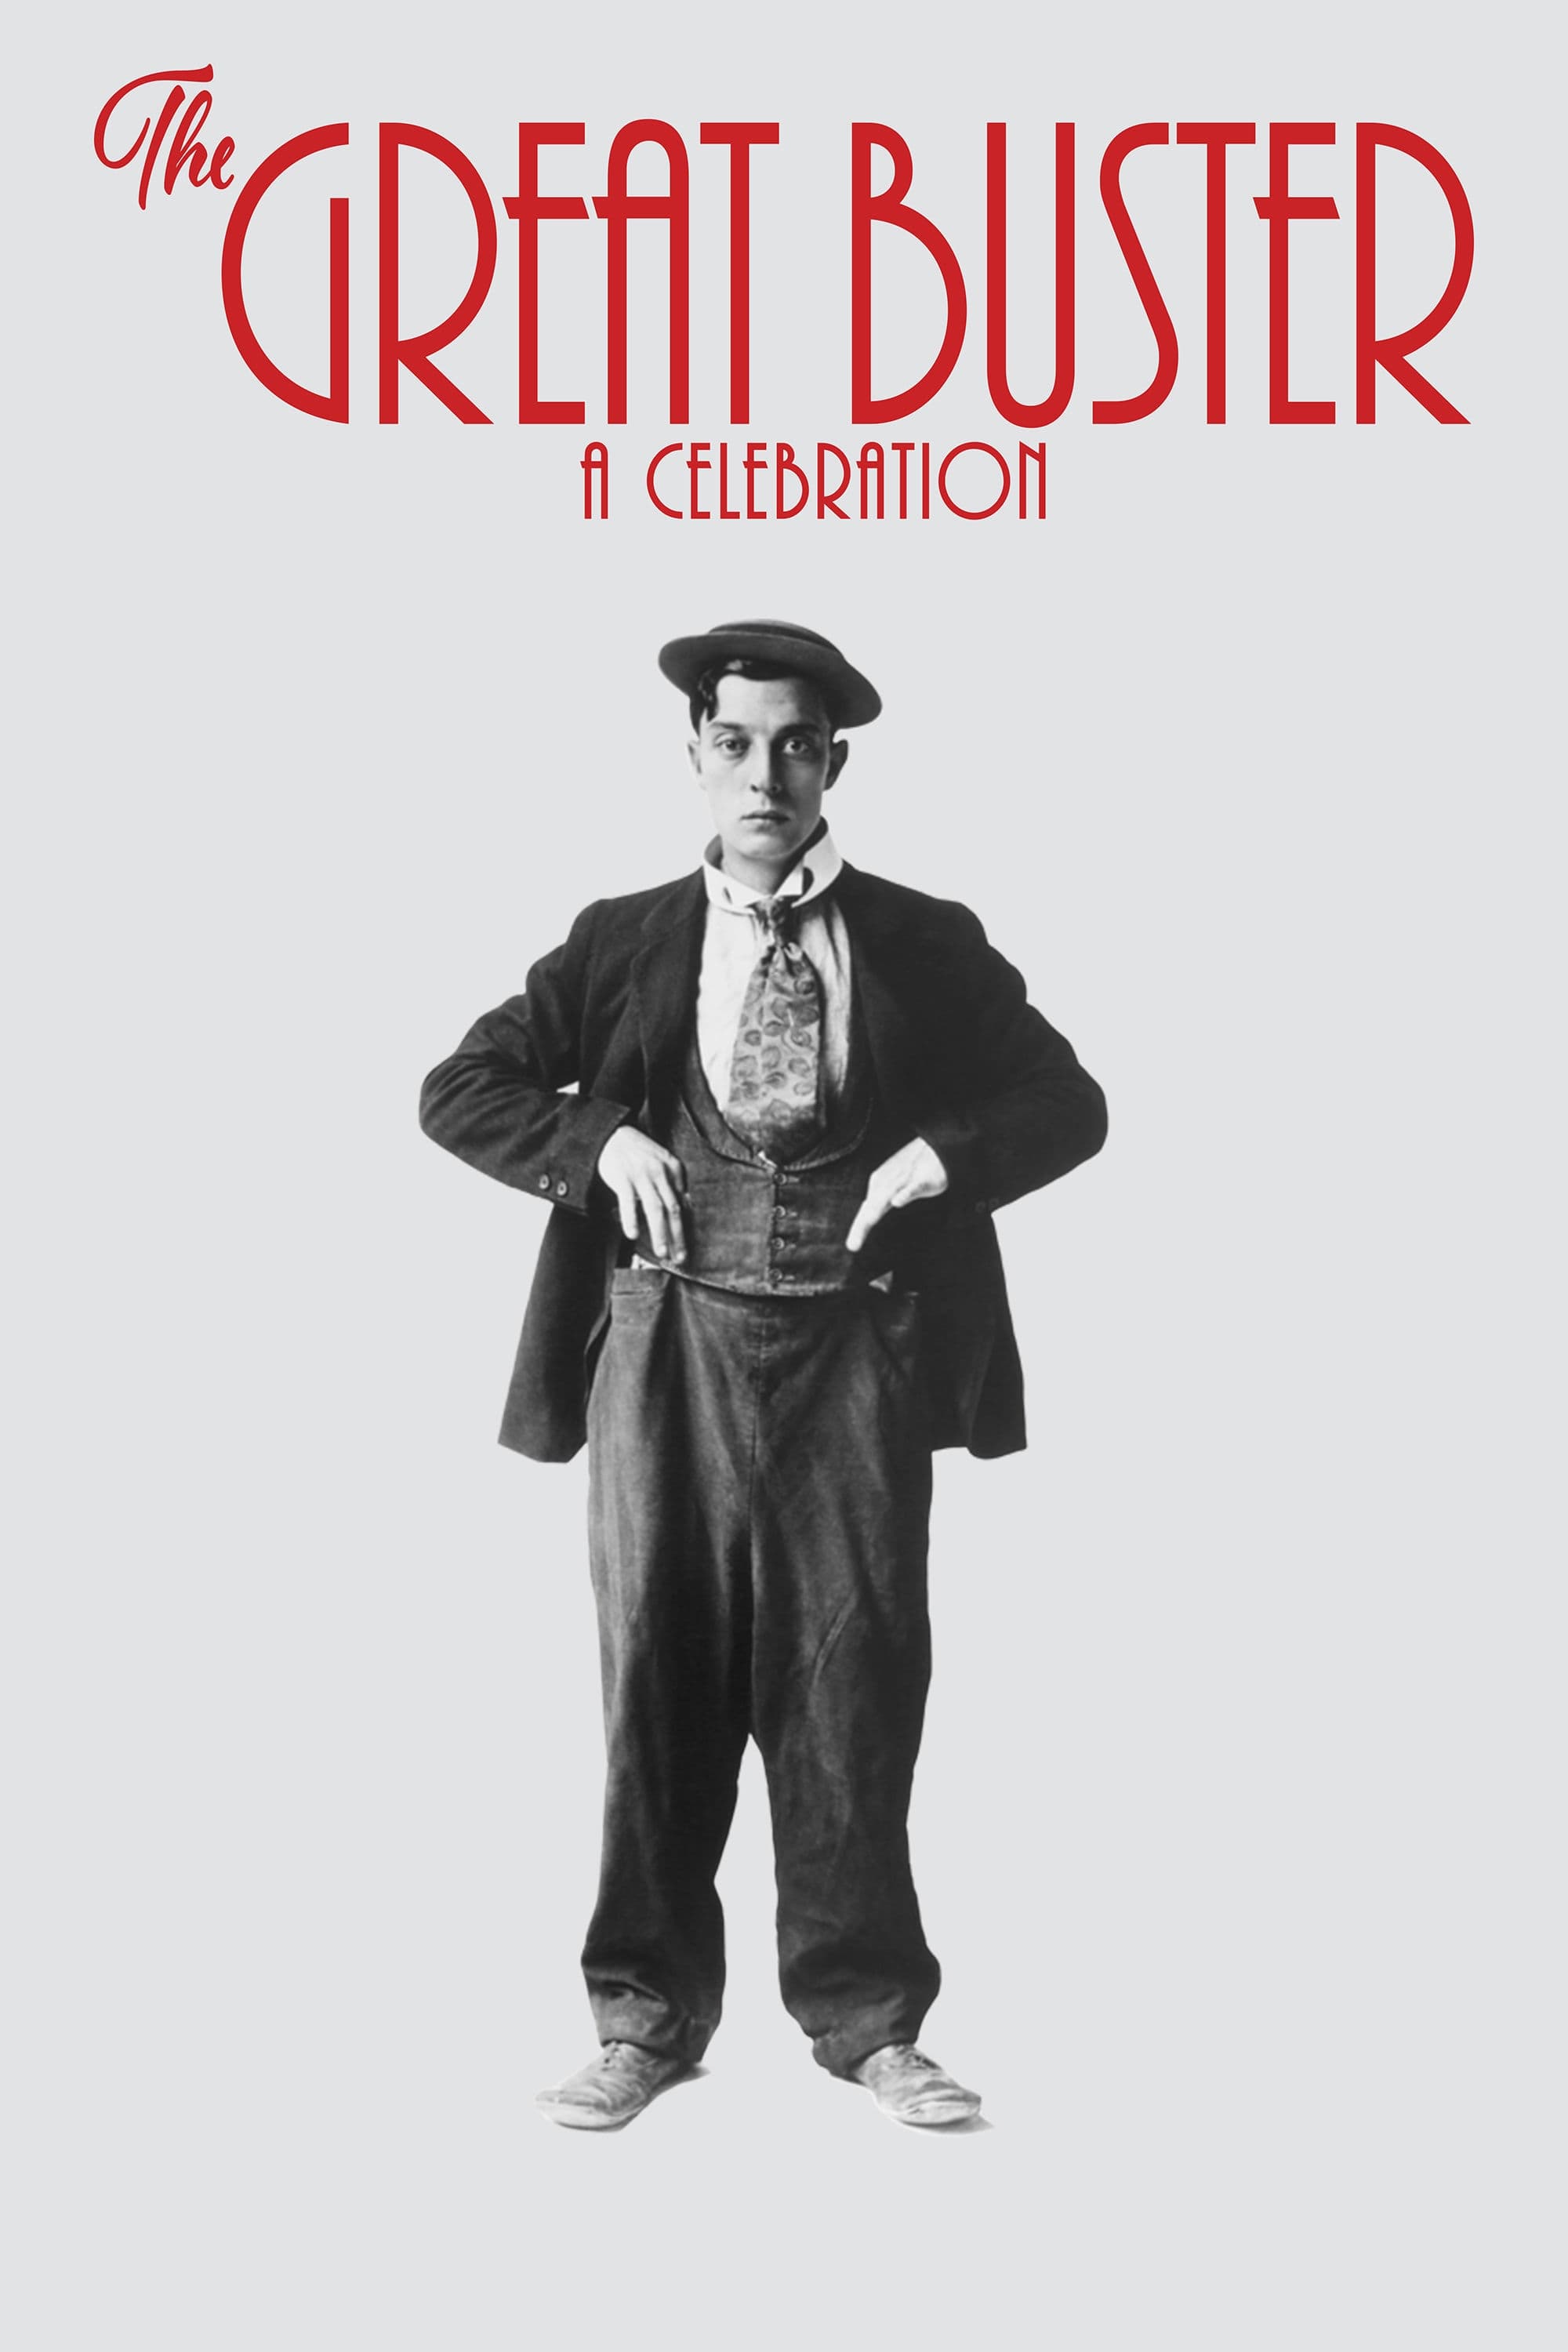 The Great Buster : A Celebration (2018)